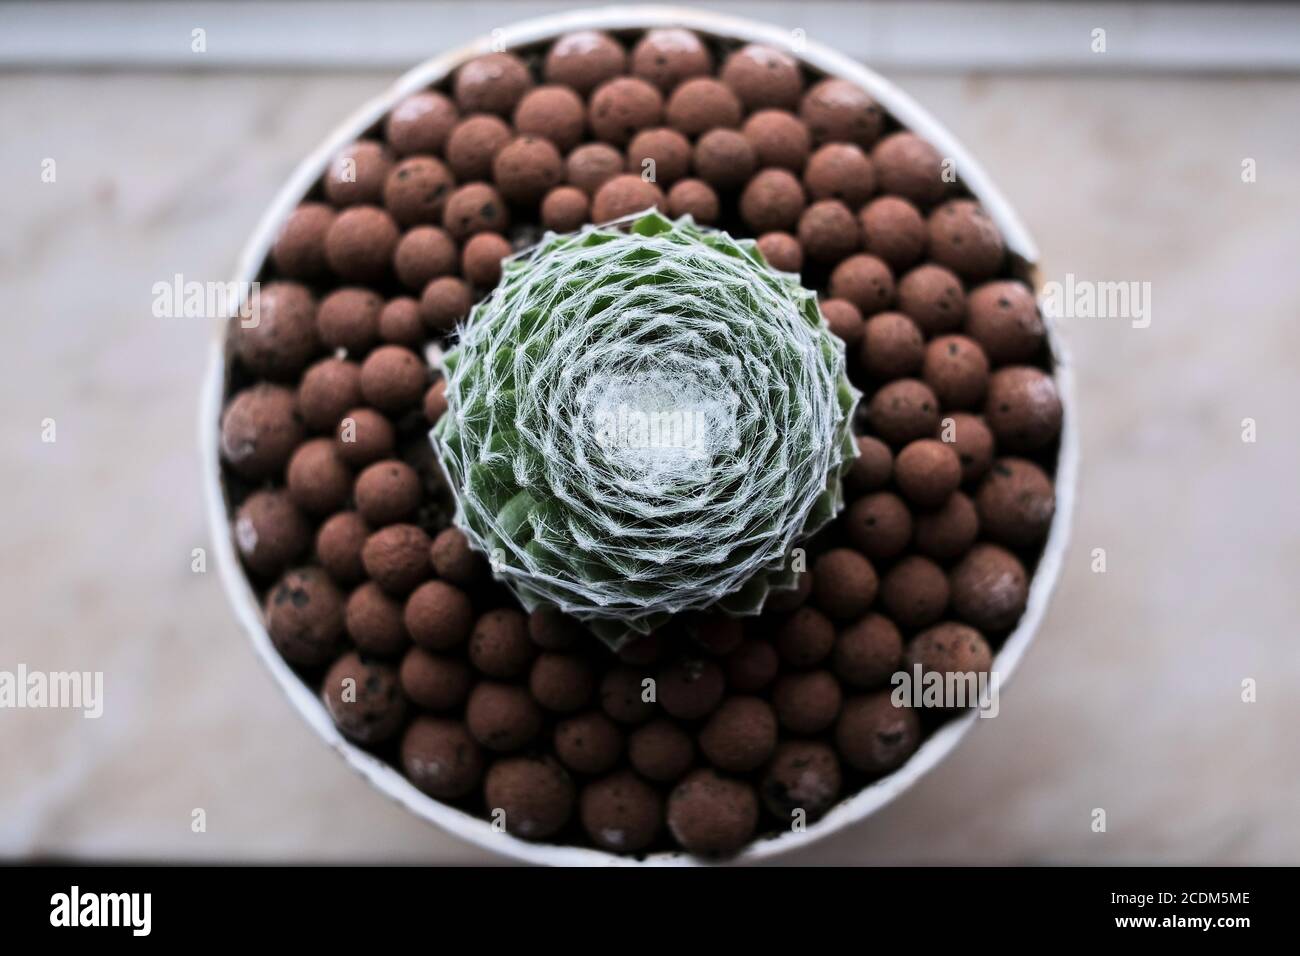 cacti and succulents, plants that are very popular in these times of lockdown, as they are distracting, easy to cultivate, requiring little space Stock Photo